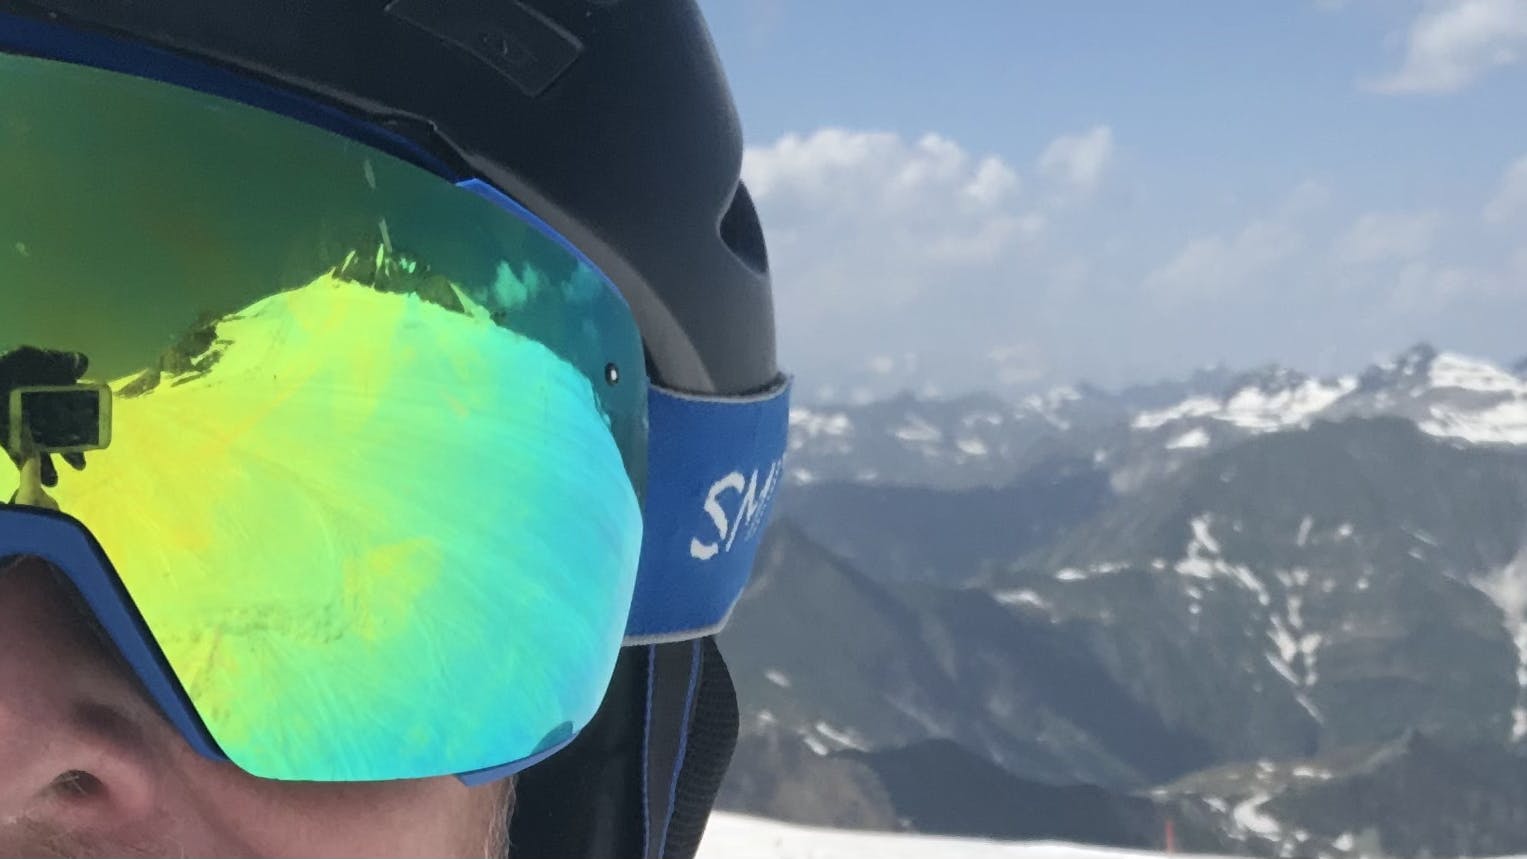 A man in a ski helmet and goggles takes a selfie on the ski slope. He is wearing the Smith I/O Mag goggles with the Sun Green Mirror Lens.